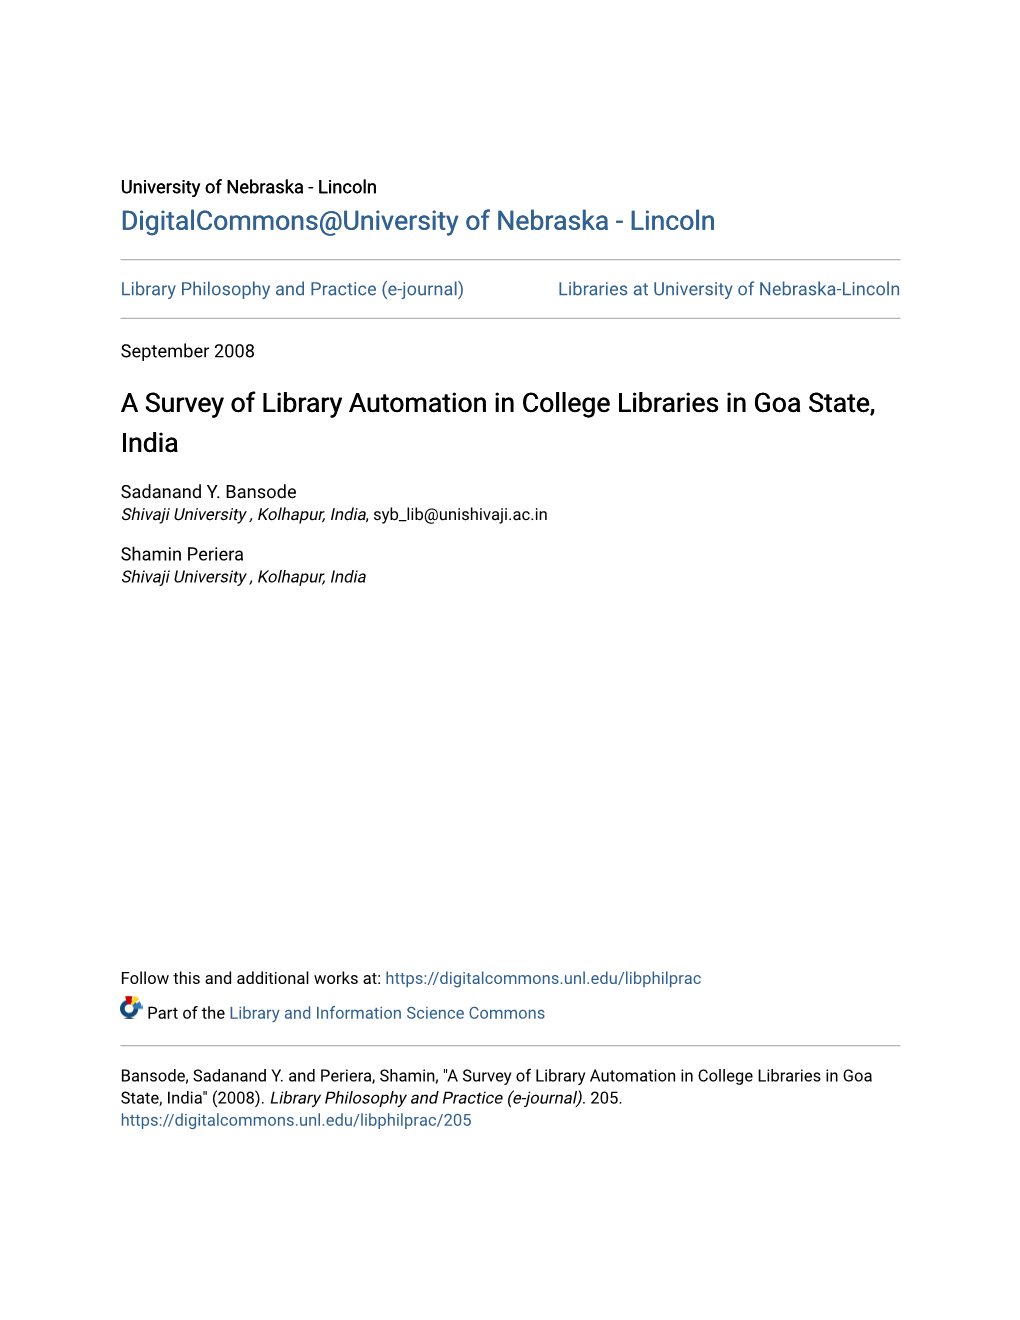 A Survey of Library Automation in College Libraries in Goa State, India